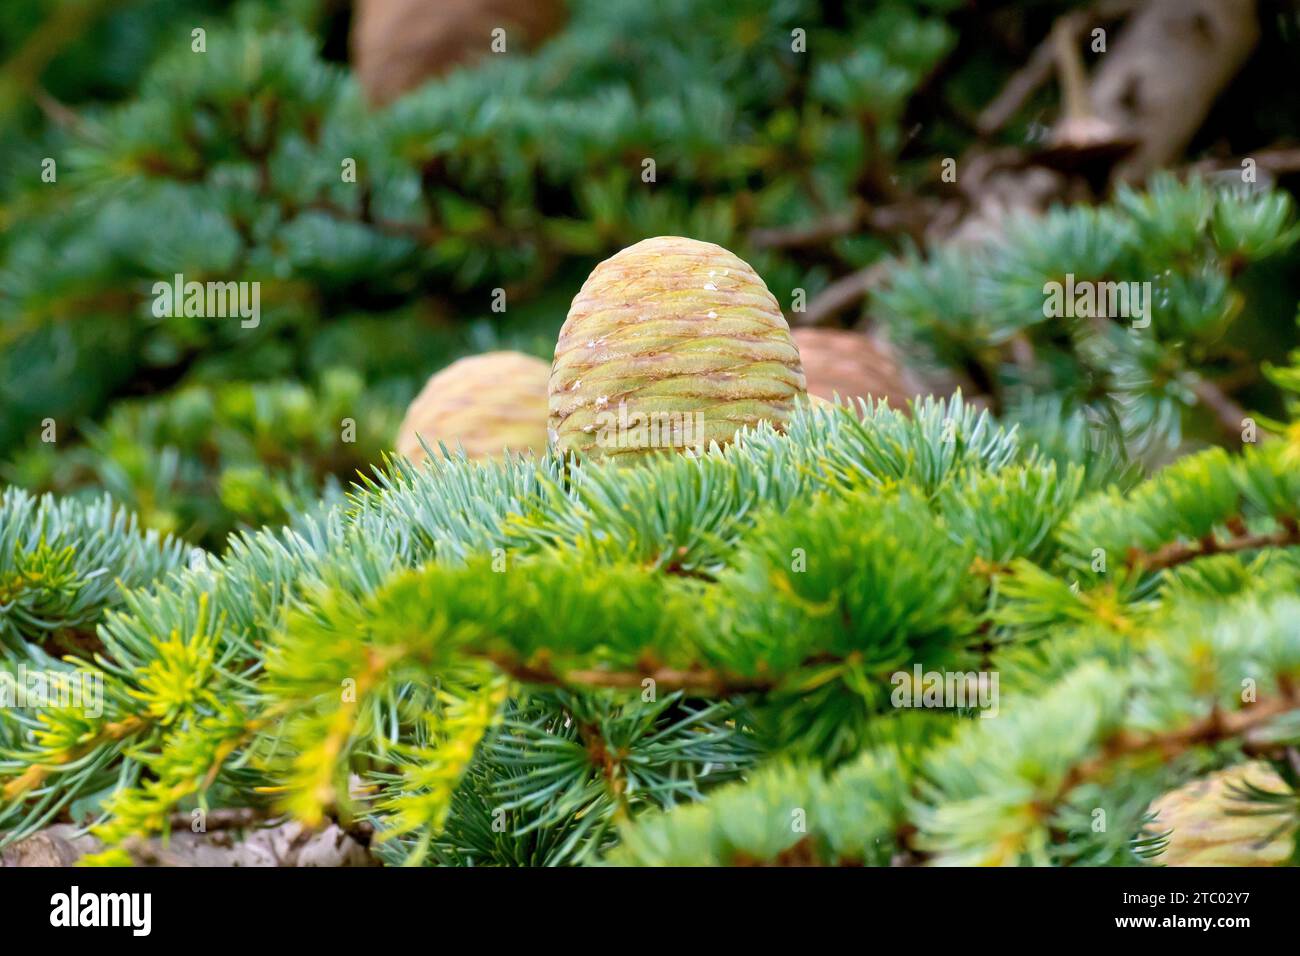 Cedar of Lebanon (cedrus libani), close up showing an unripe immature cone standing upright on a branch of the introduced tree. Stock Photo